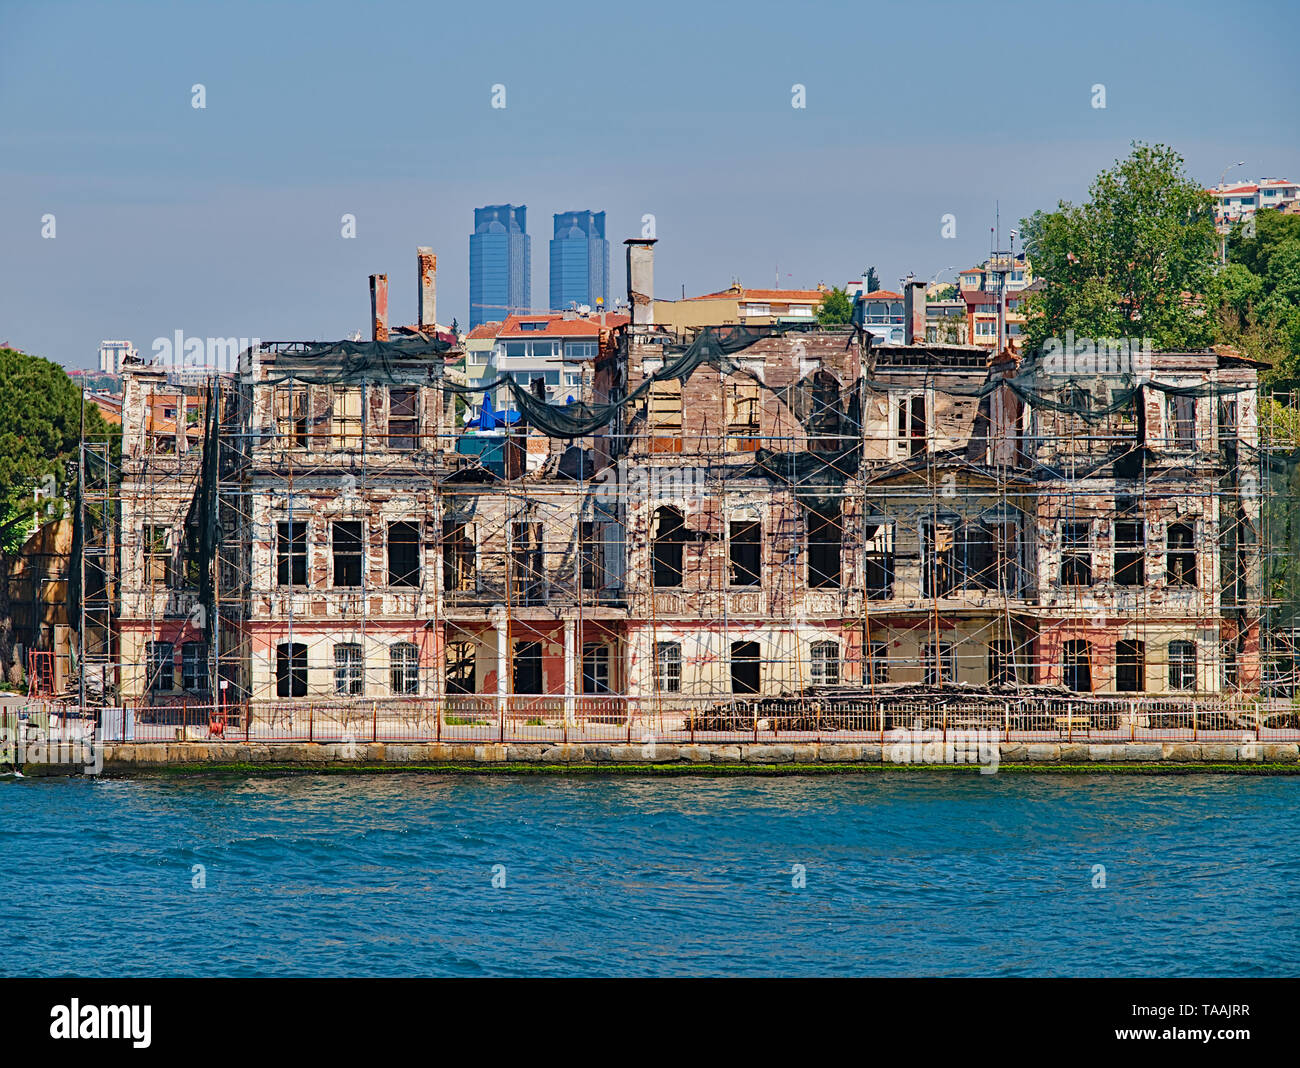 Bosporus strait, view from cruise ship. Old traditional damaged wooden building with structural support and TAT twin towers at the background. Stock Photo